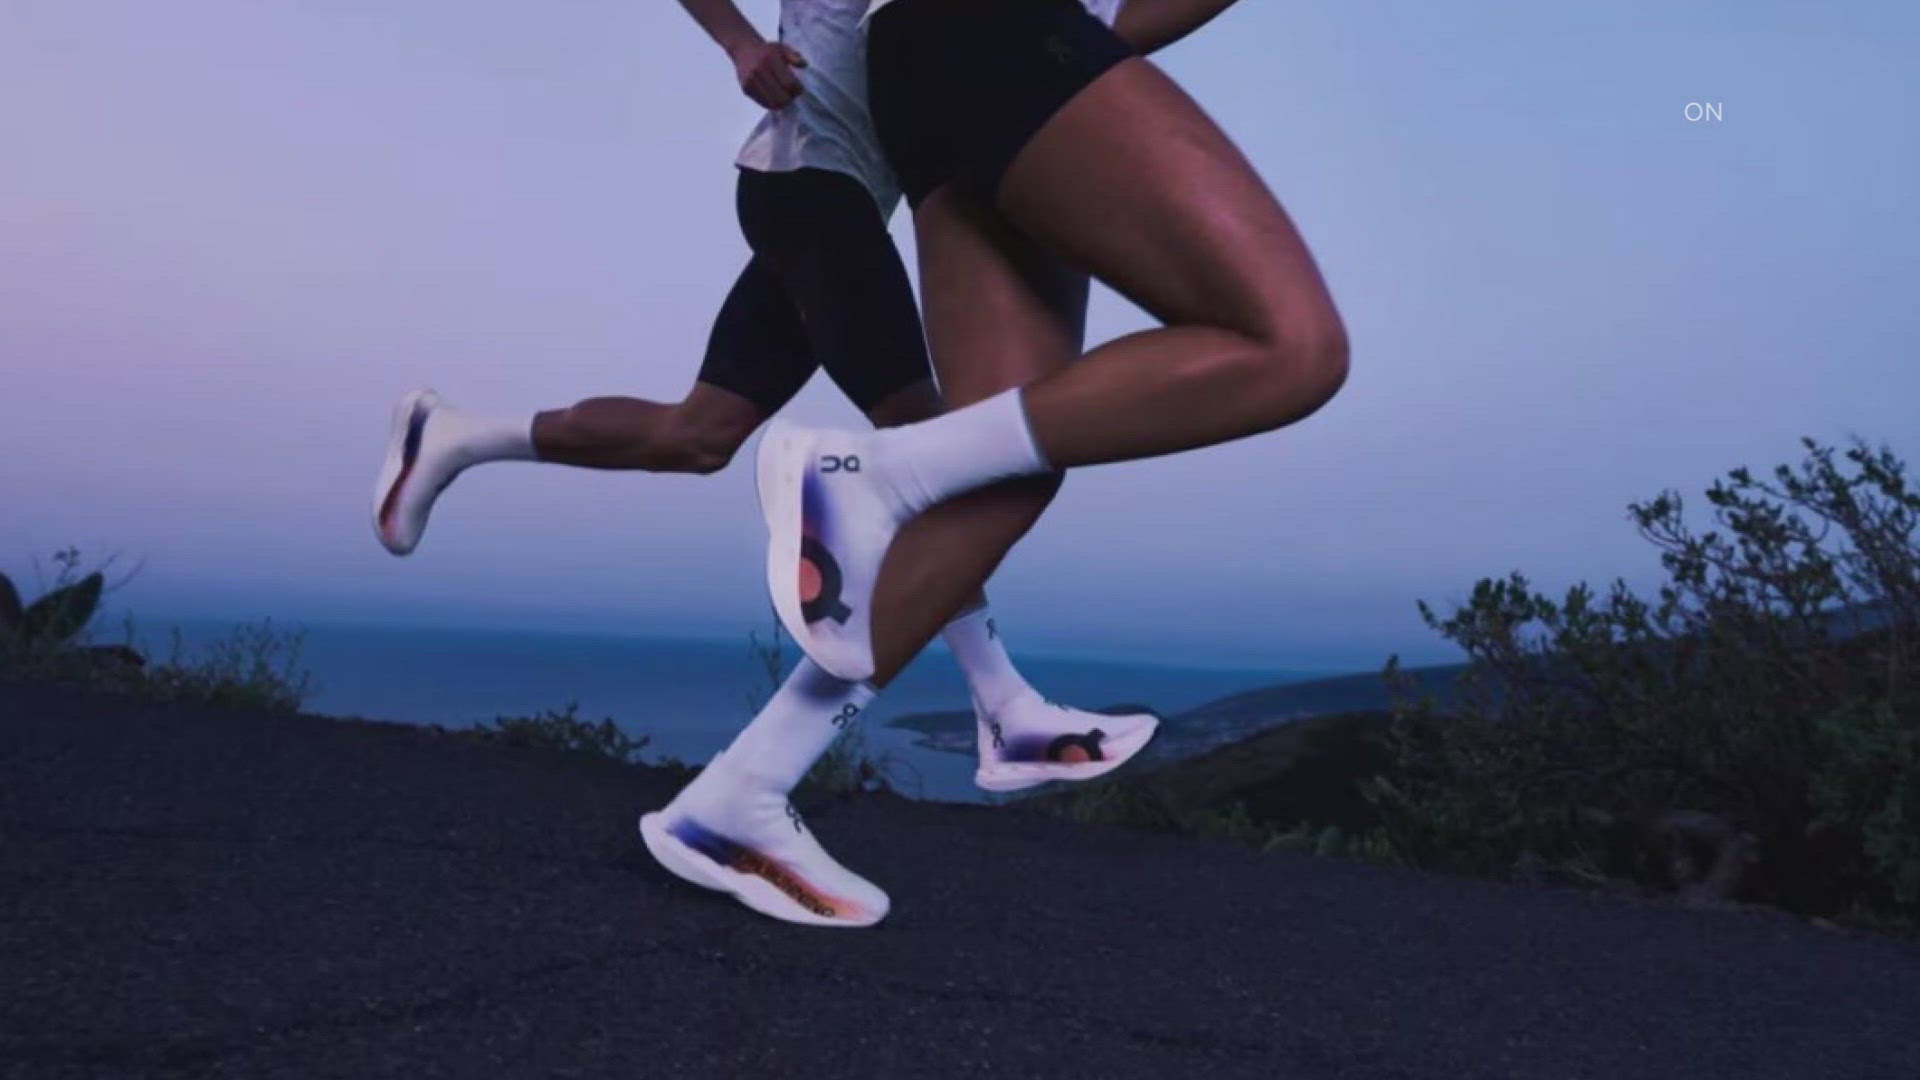 Some runners will sport new spray-on shoes at the Summer Olympics in Paris. Here's how the technology works.